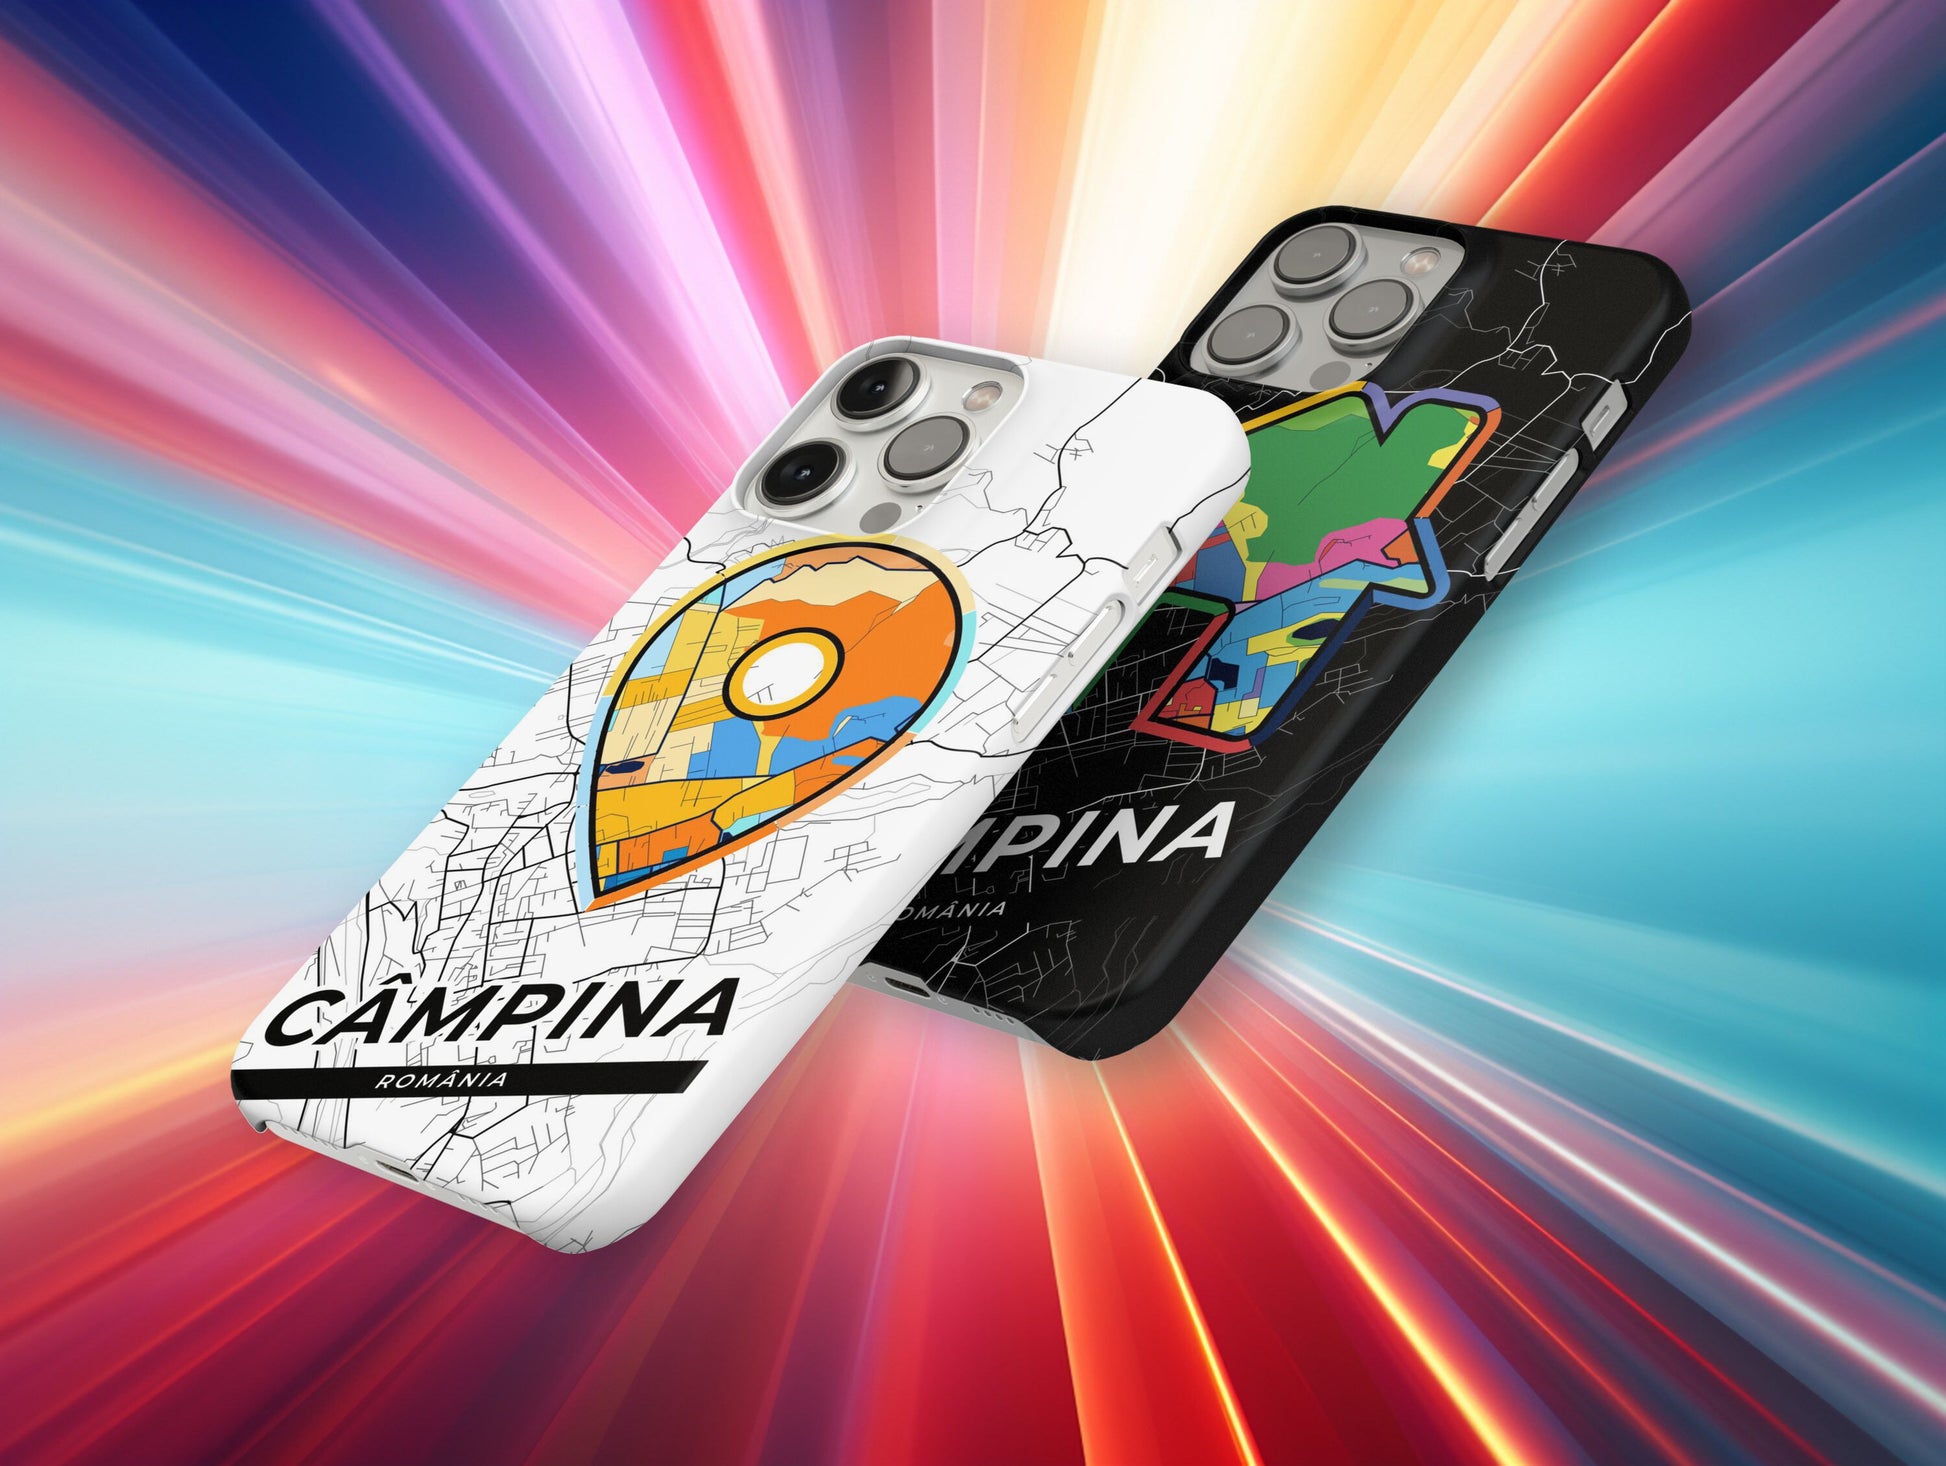 Câmpina Romania slim phone case with colorful icon. Birthday, wedding or housewarming gift. Couple match cases.